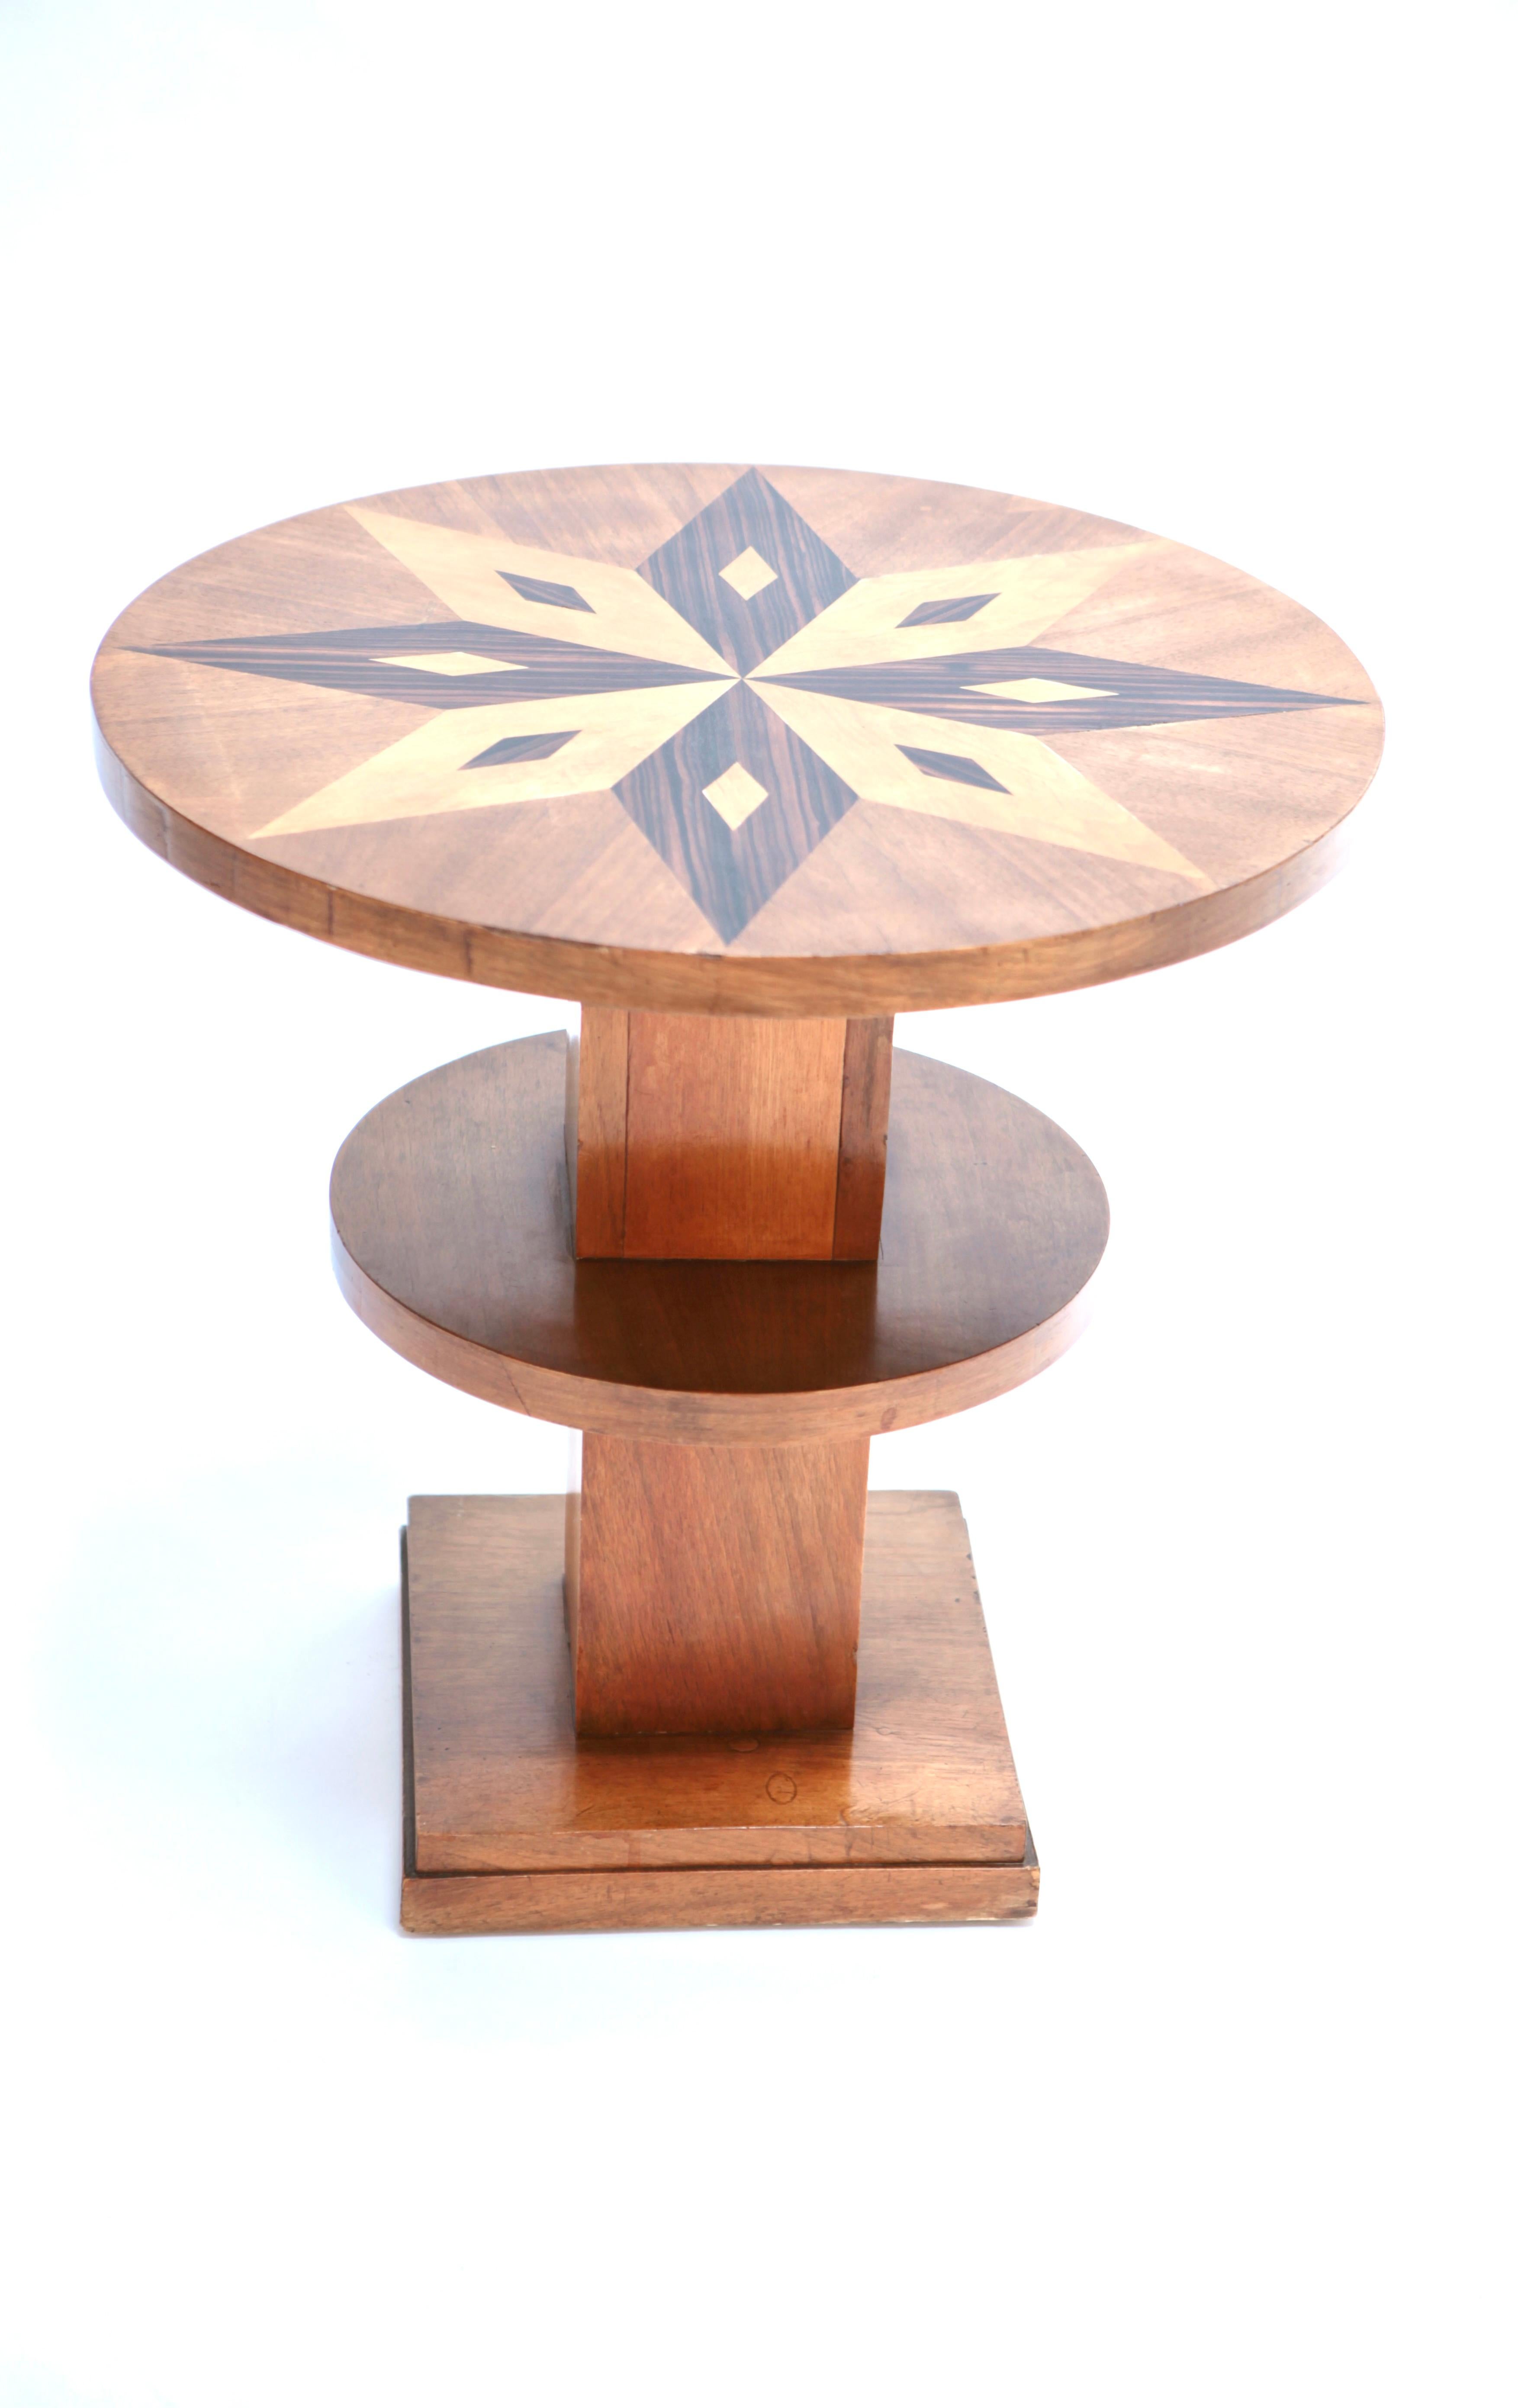 Oak A French Art Deco Side Table, Wood Inlayed & Veneer, France 1930s For Sale